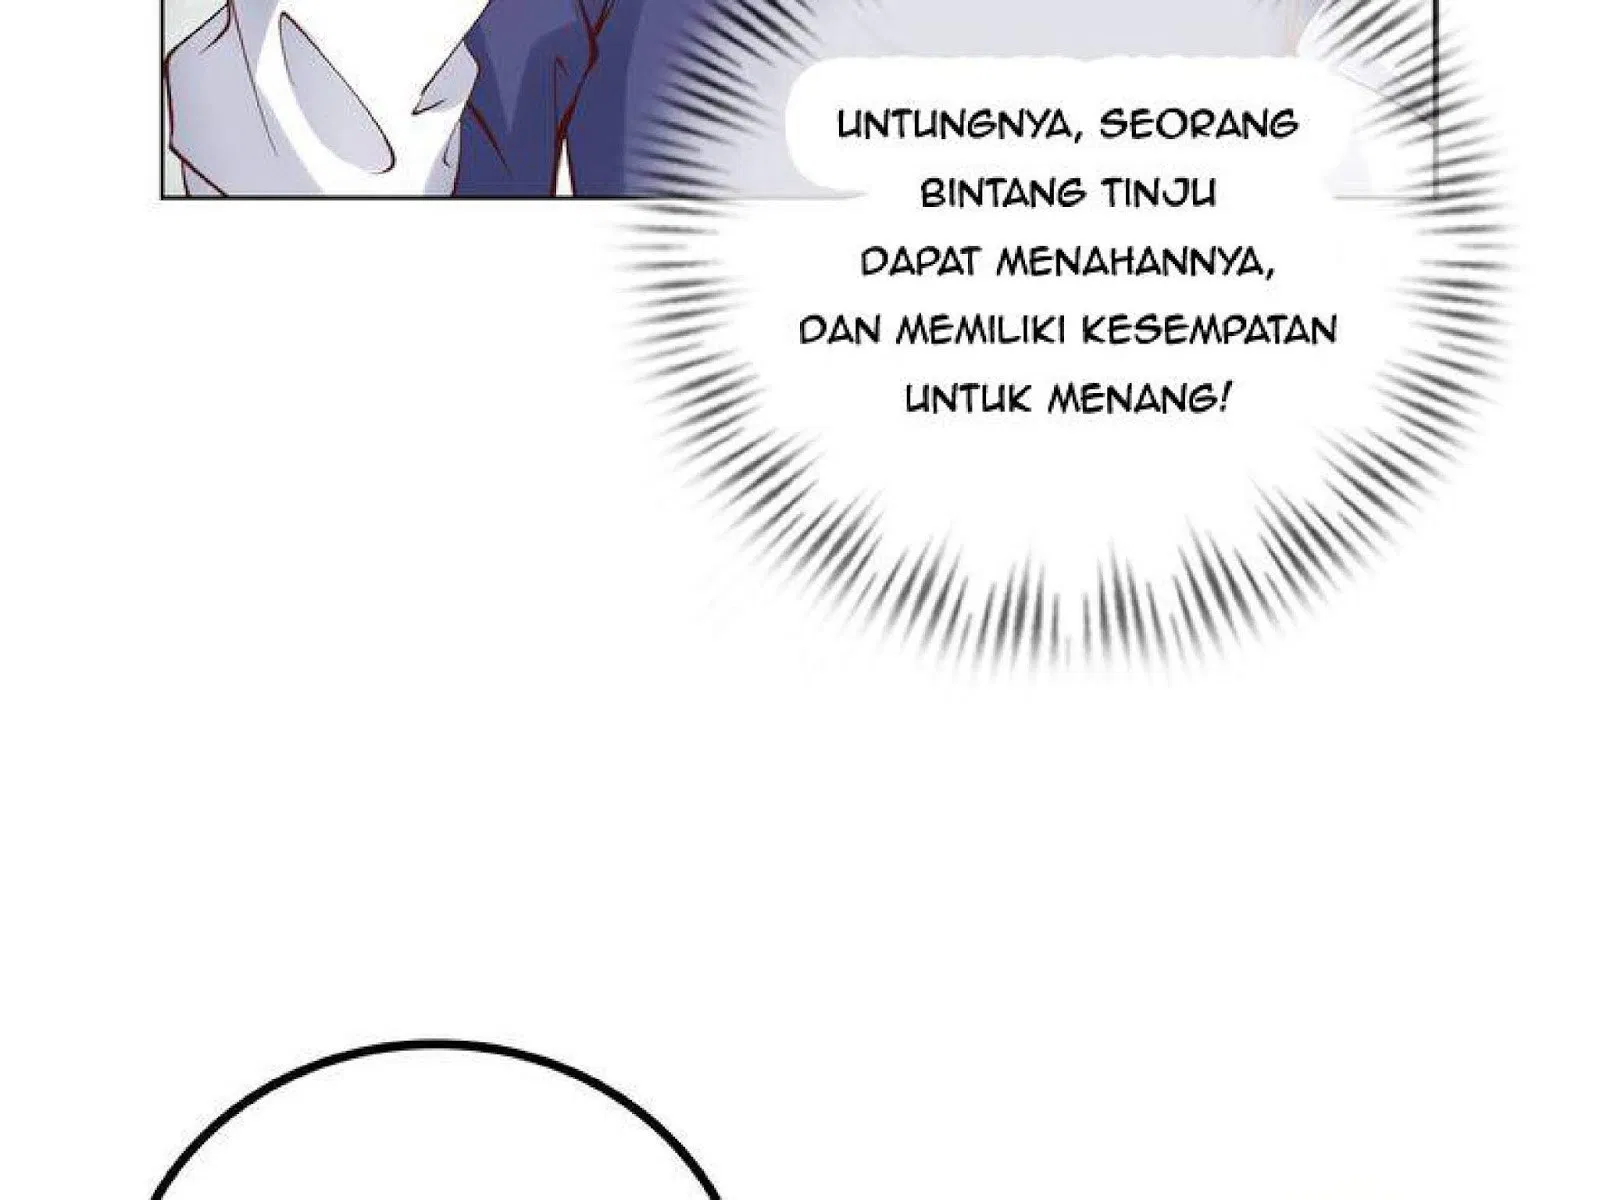 I Am an Invincible Genius Chapter 02